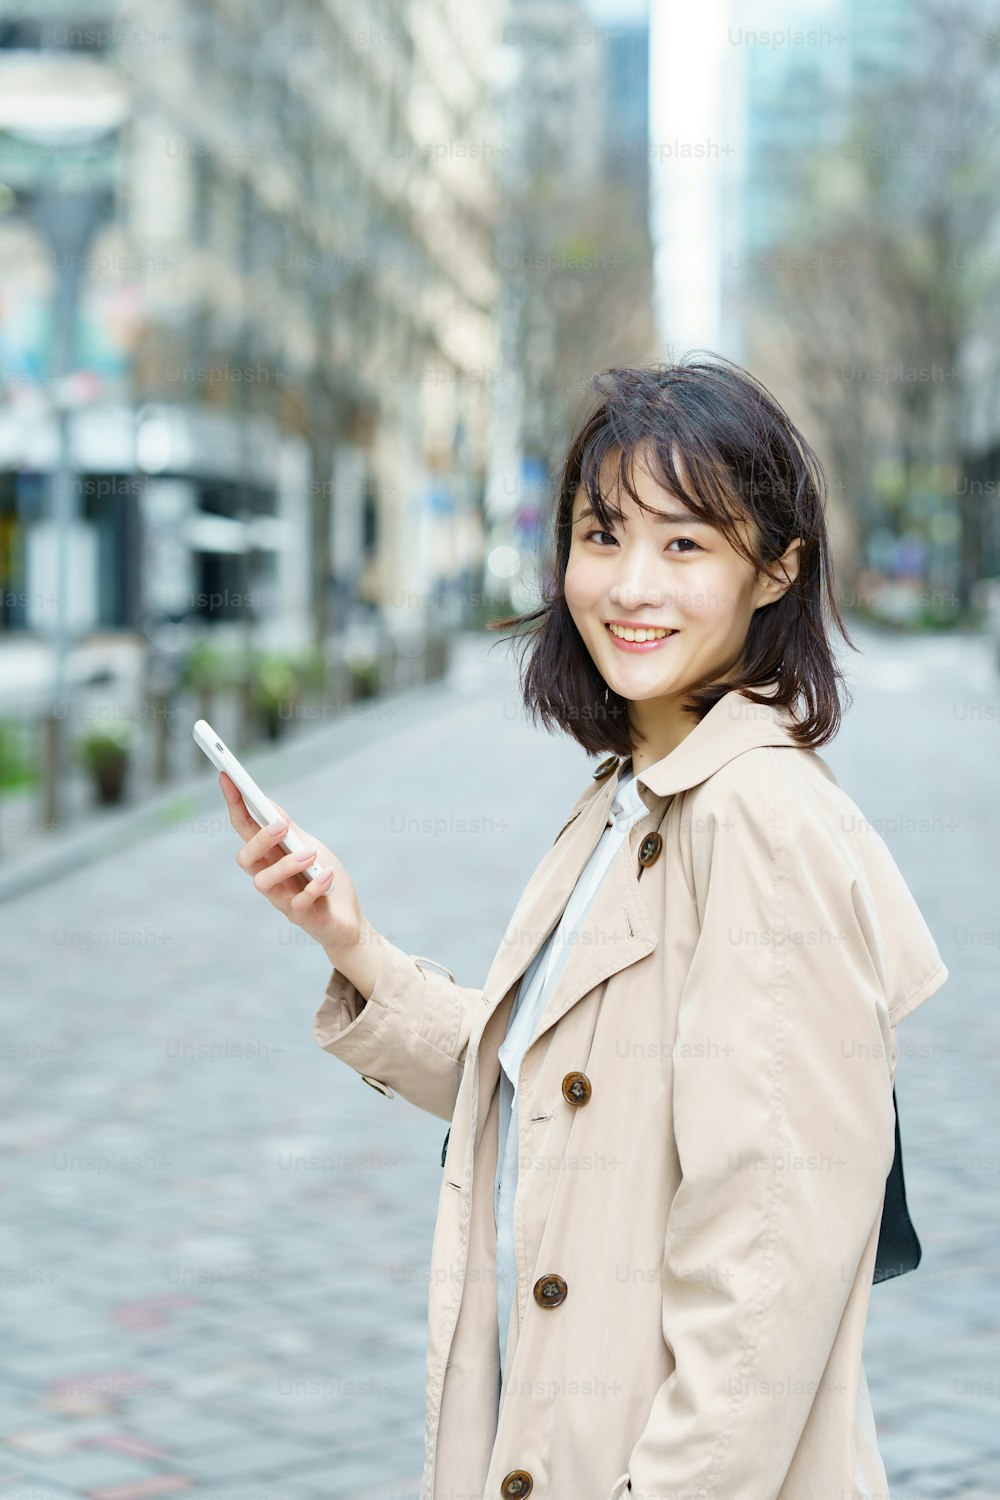 A woman walking in a business district with a smartphone in her hand